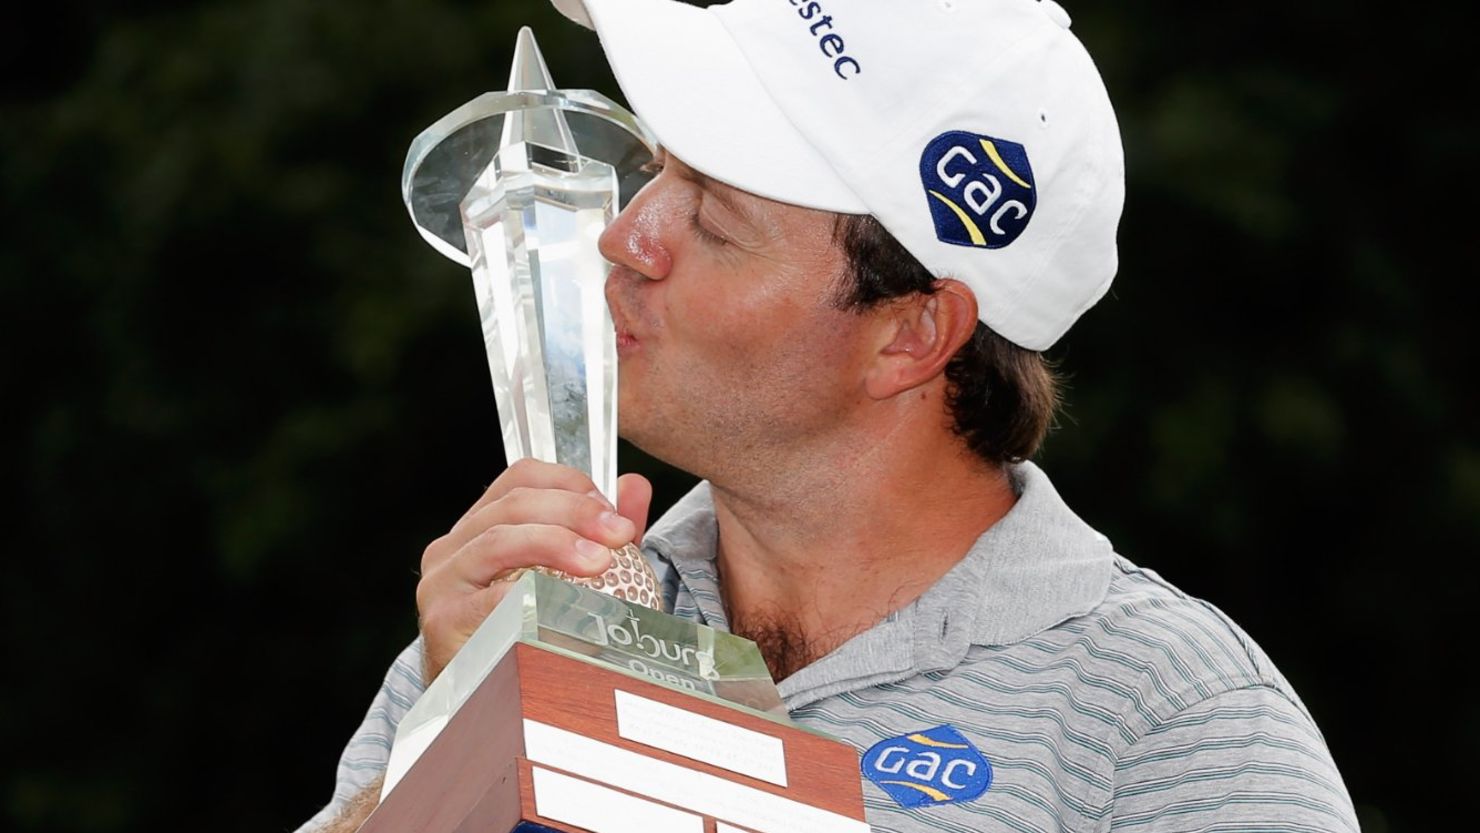 South African golfer Richard Sterne savors his victory at the Joburg Open on Sunday, having also won it in 2008.